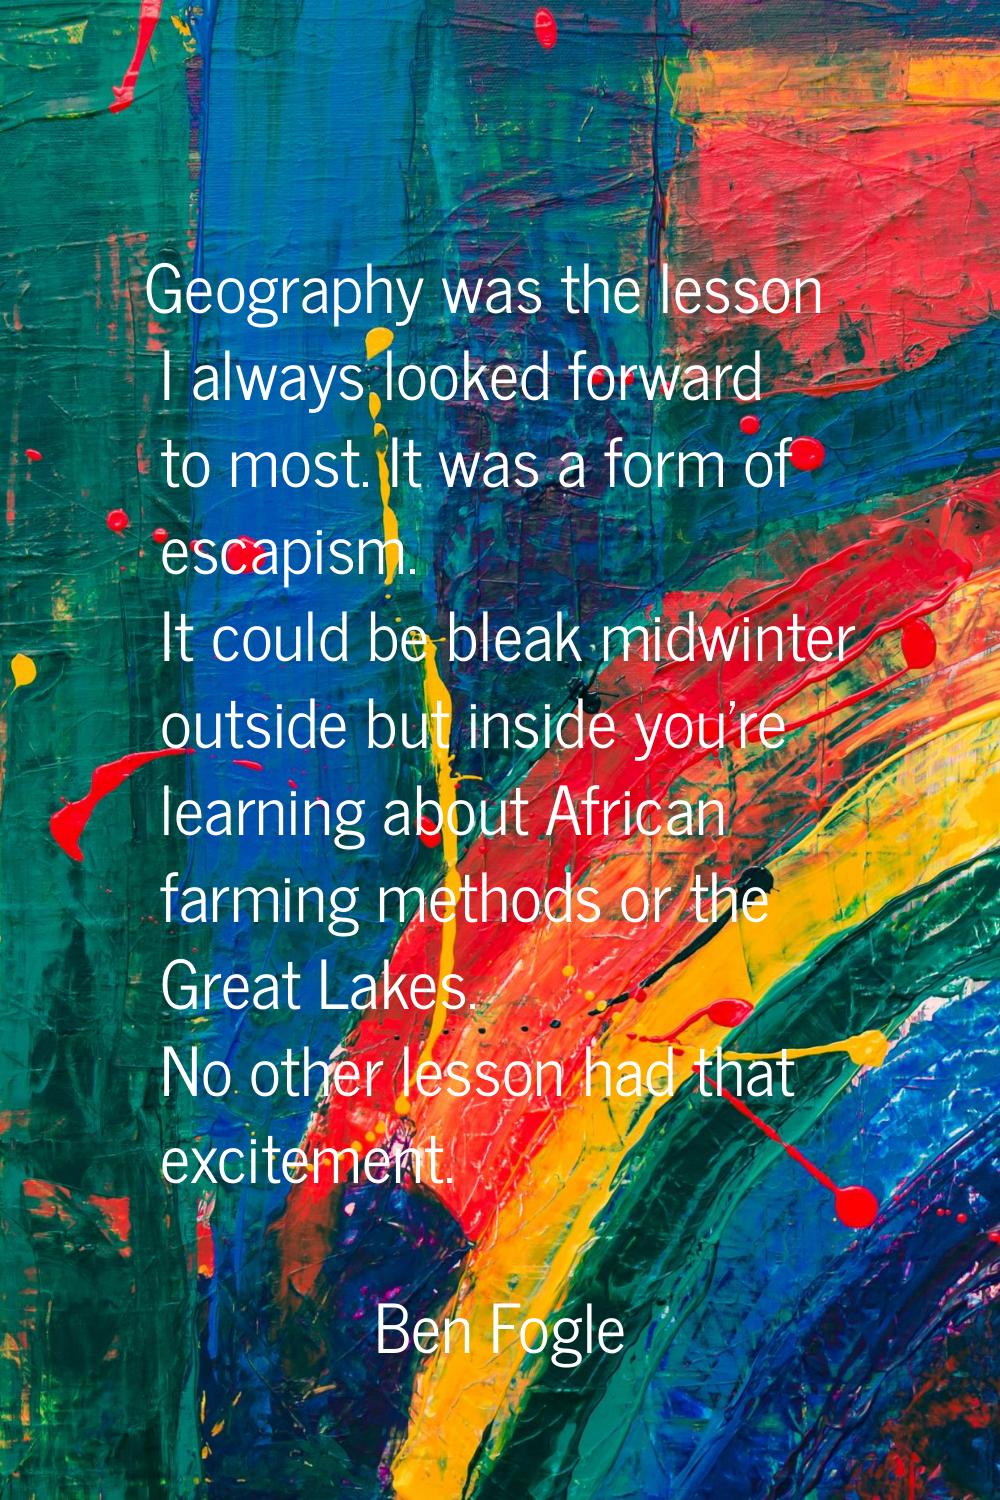 Geography was the lesson I always looked forward to most. It was a form of escapism. It could be bl